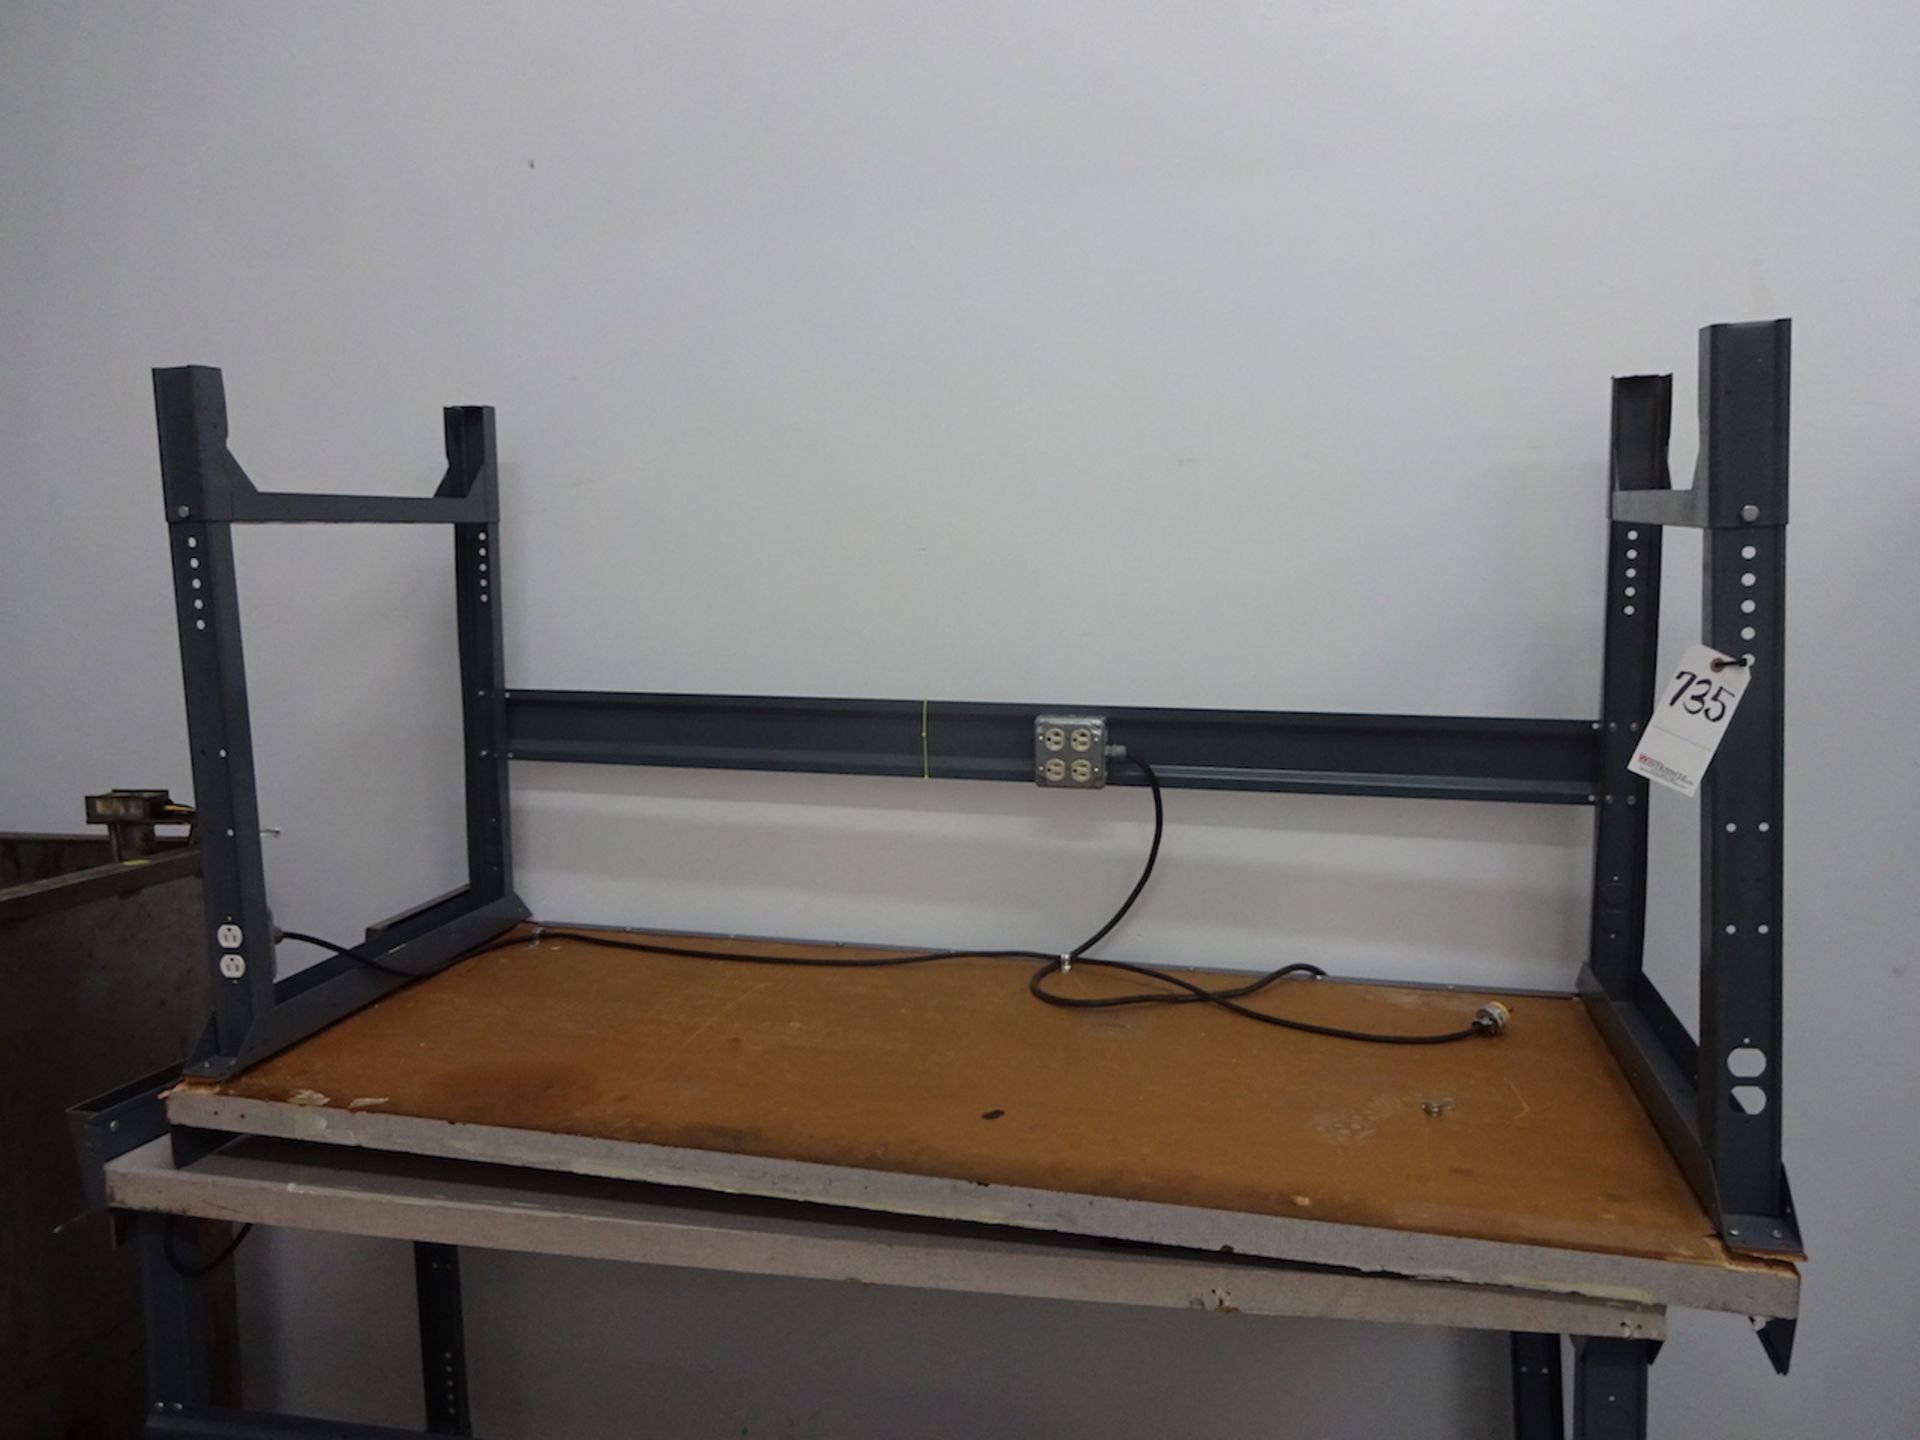 30" X 72" (APPROX.) STEEL WORK BENCH; Wood Top & Electrical Outlets